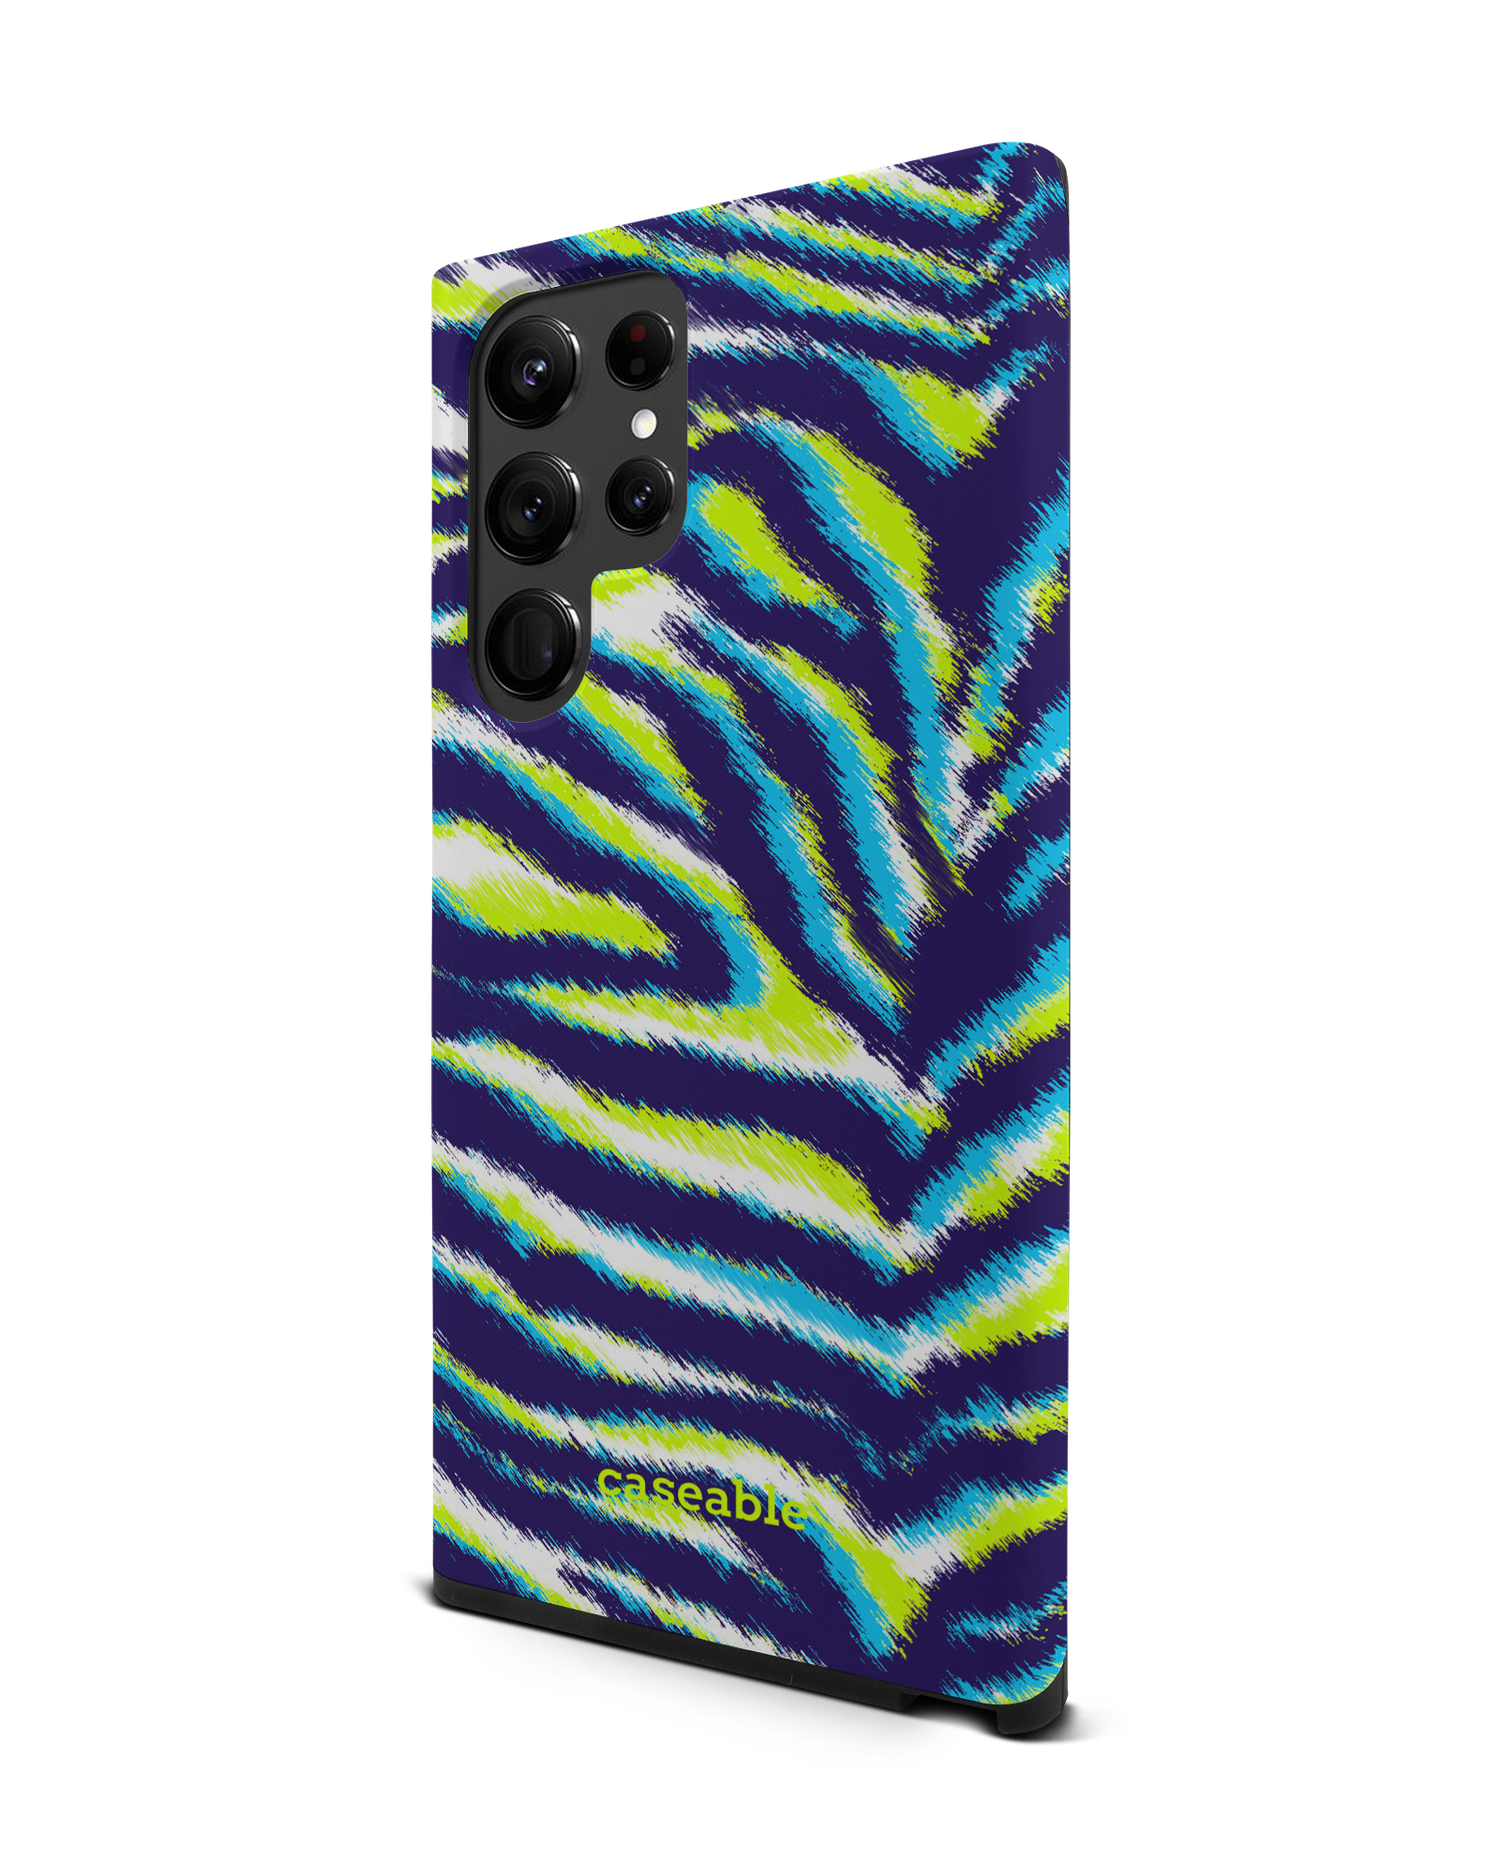 Neon Zebra Premium Phone Case Samsung Galaxy S22 Ultra 5G: View from the right side